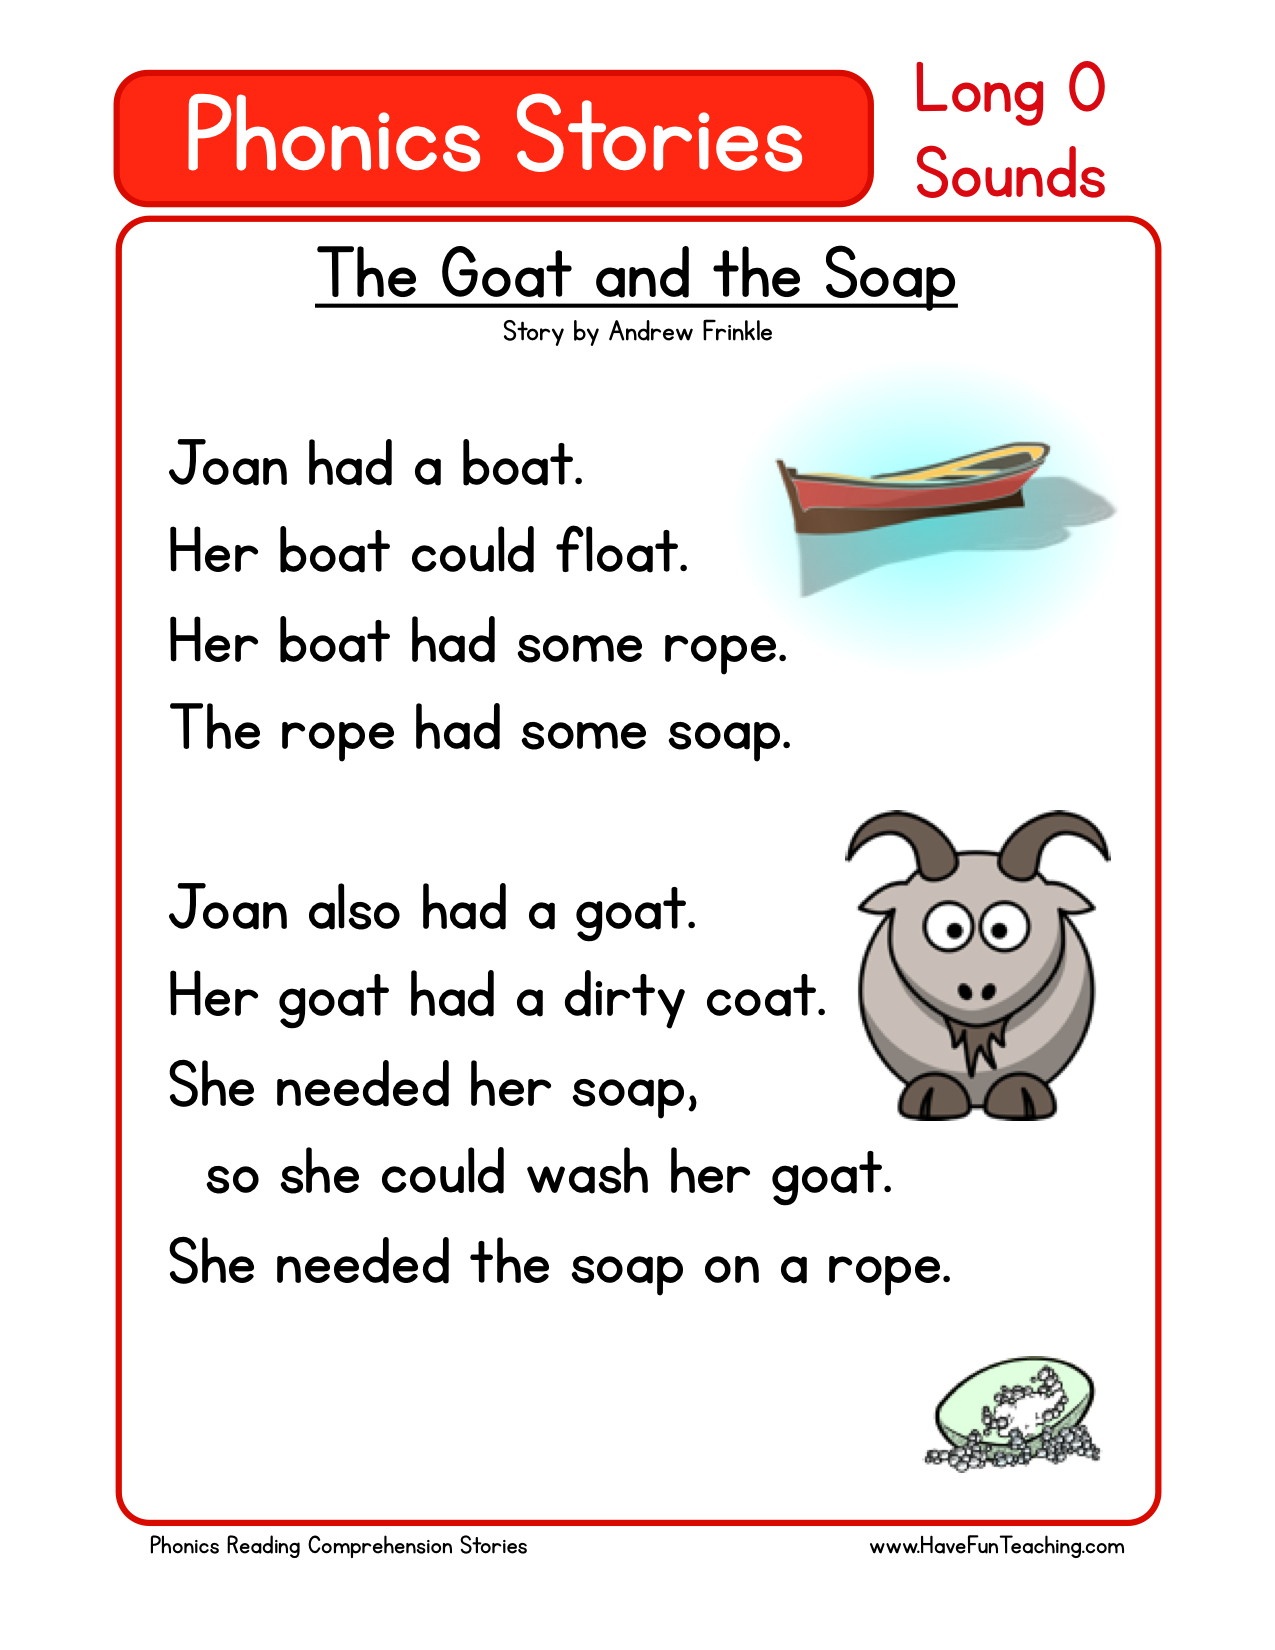 Reading Comprehension Worksheet - The Goat And The Soap - Free Phonics Readers Printable